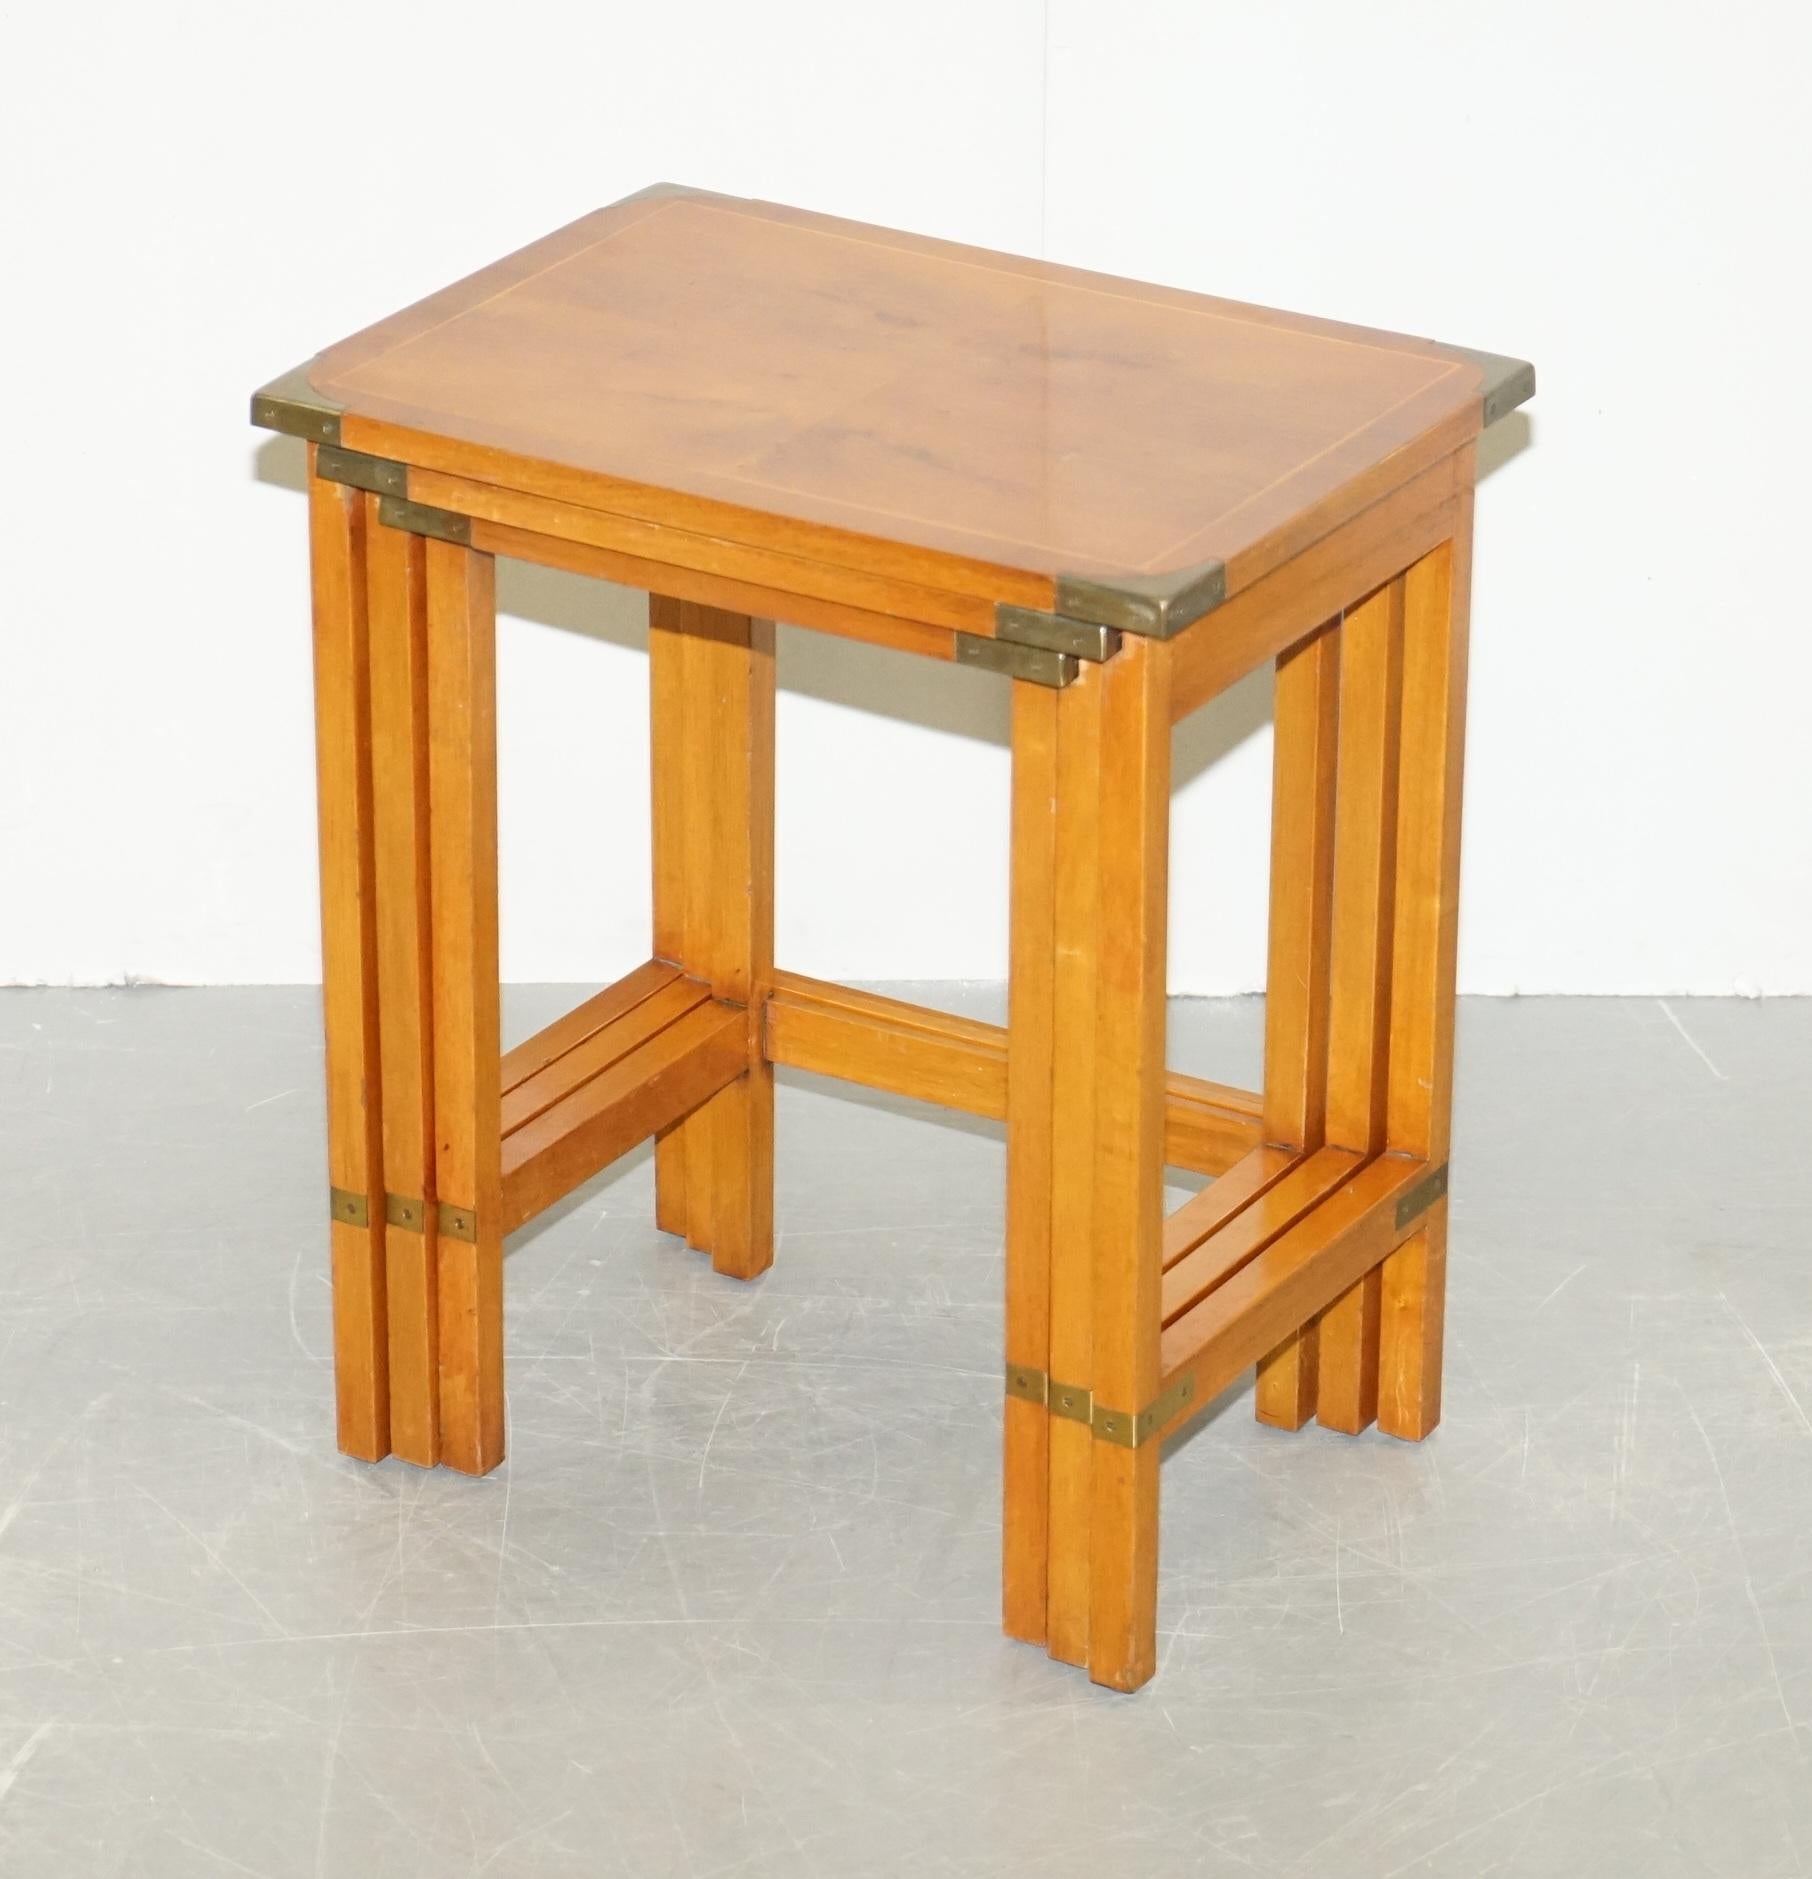 We are delighted to this lovely burr yew wood nest of three military campaign side tables

A very good suite of nested tables, I’ve never seen this exact suite before, the timber is rare as is the form

In terms of the condition we have cleaned